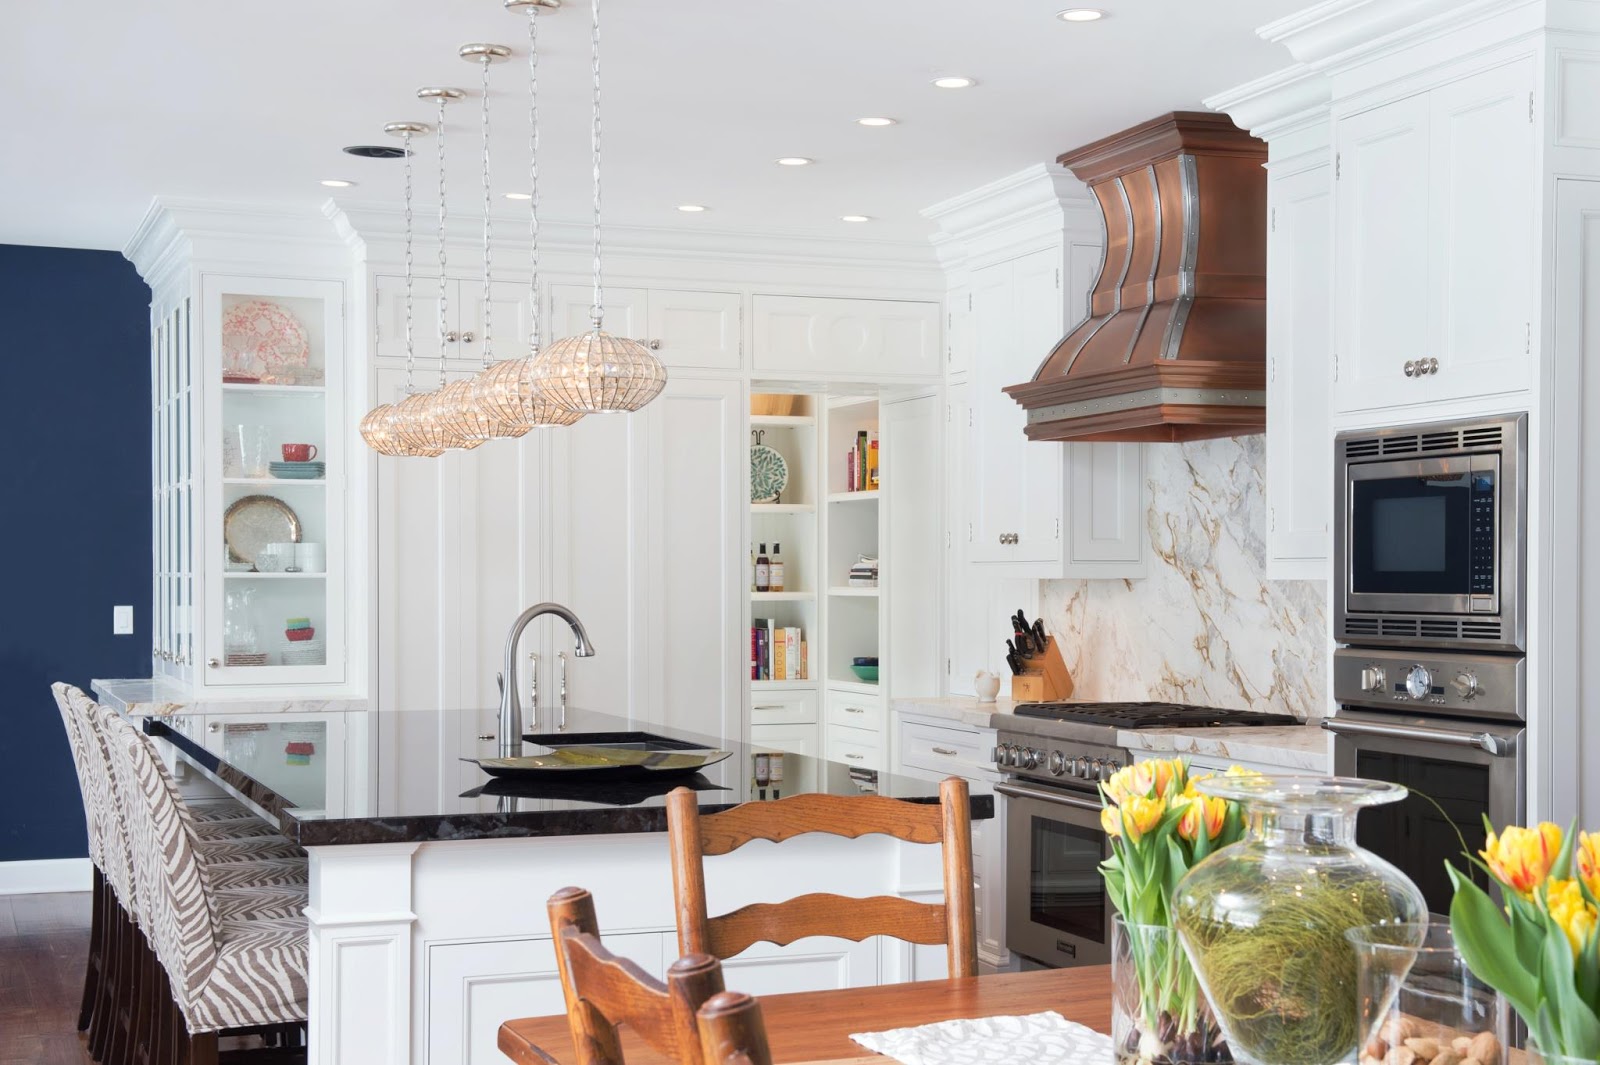 What Makes Copper Range Hoods Different From Other Materials?